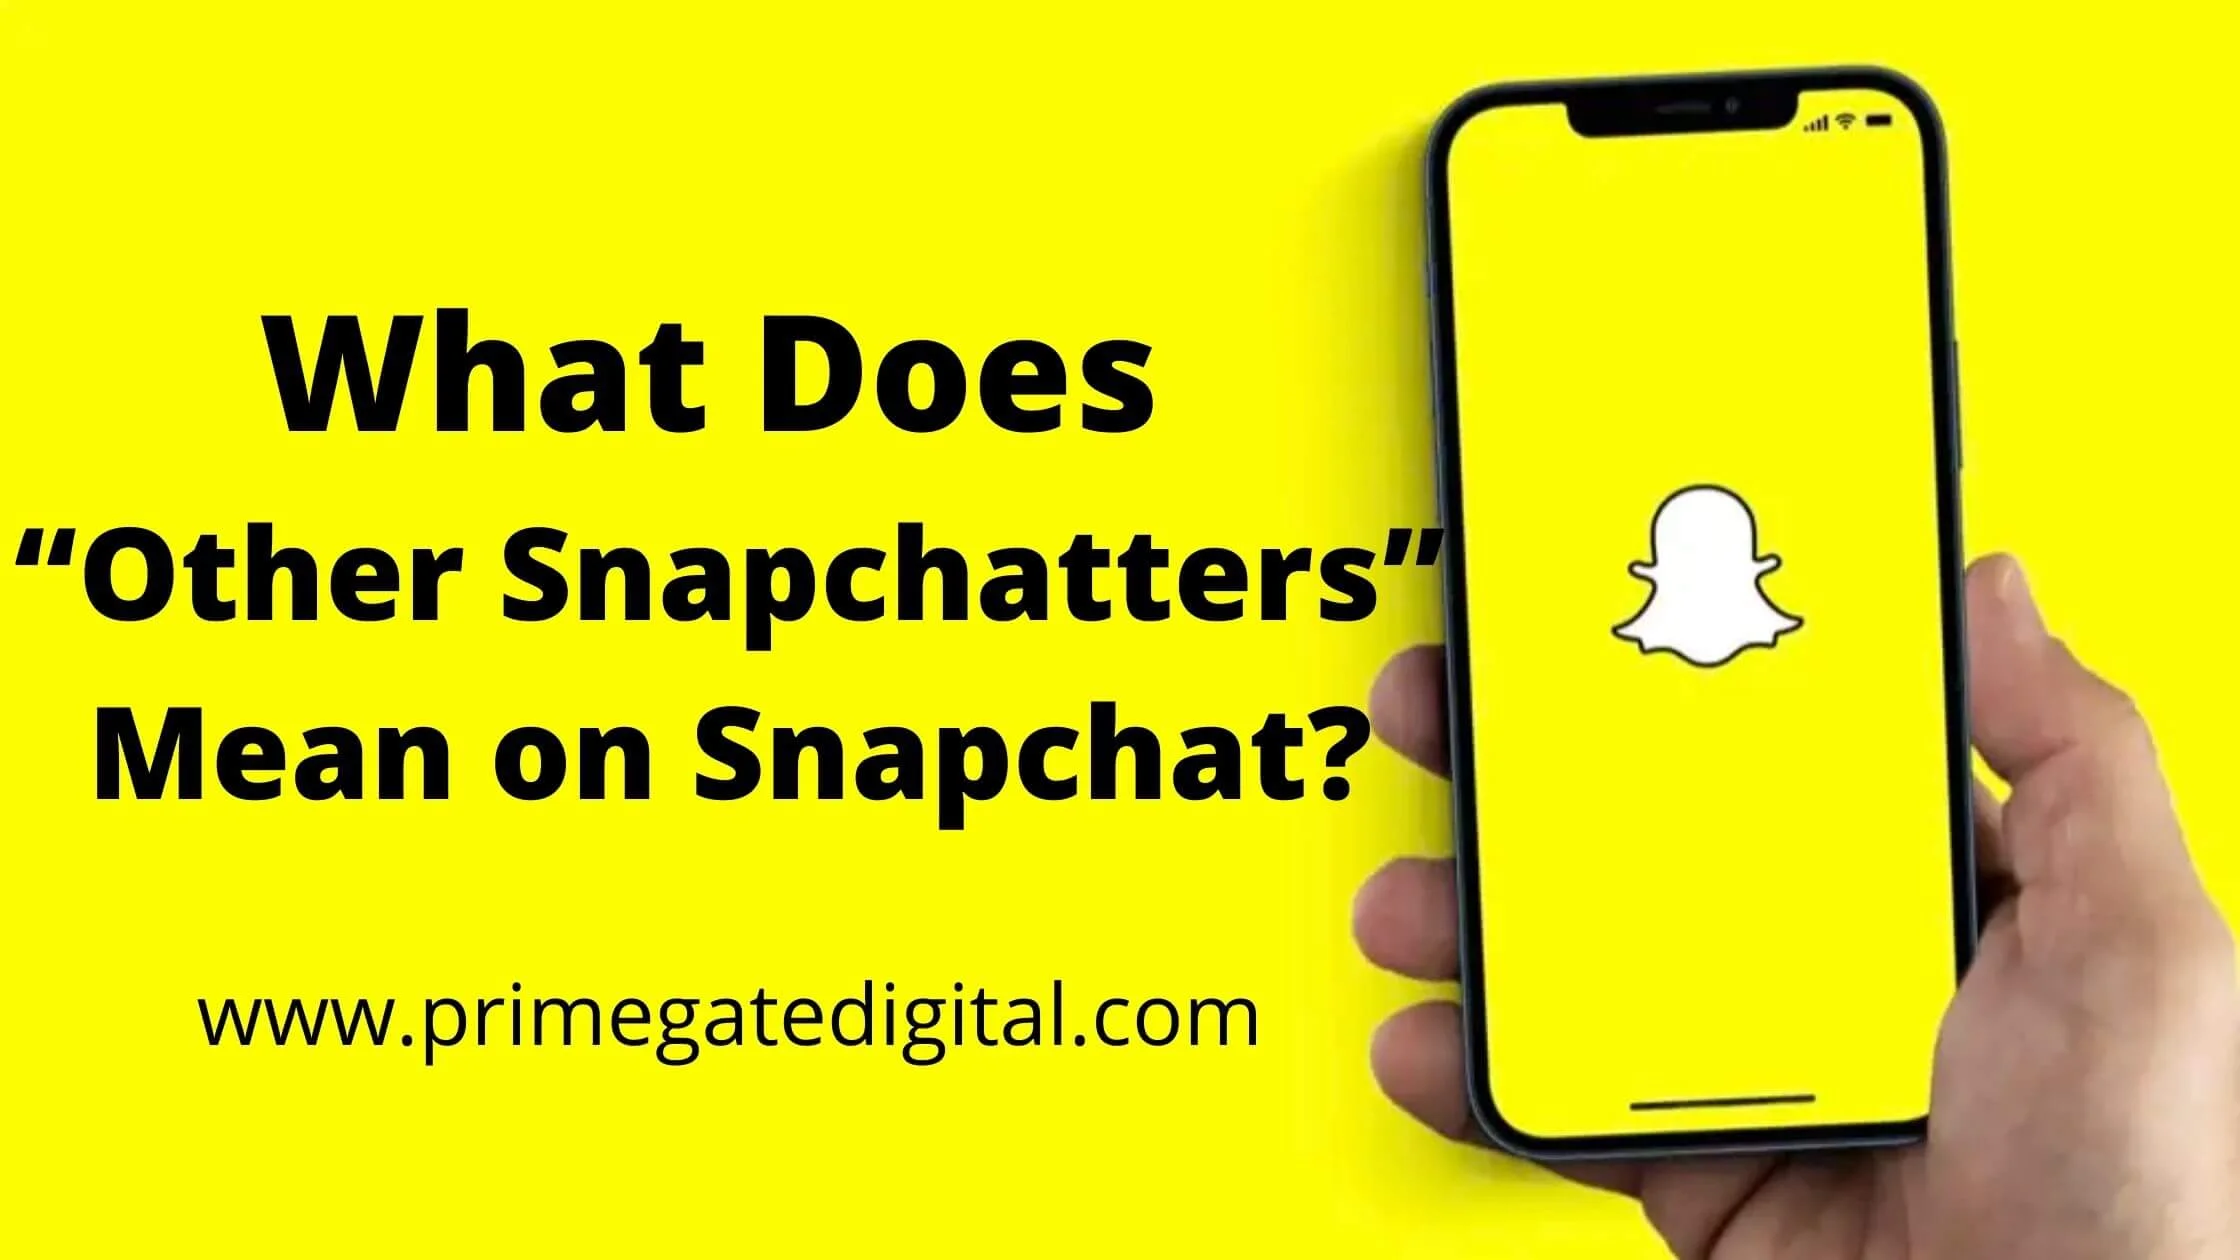 What Does “Other Snapchatters” Mean on Snapchat?